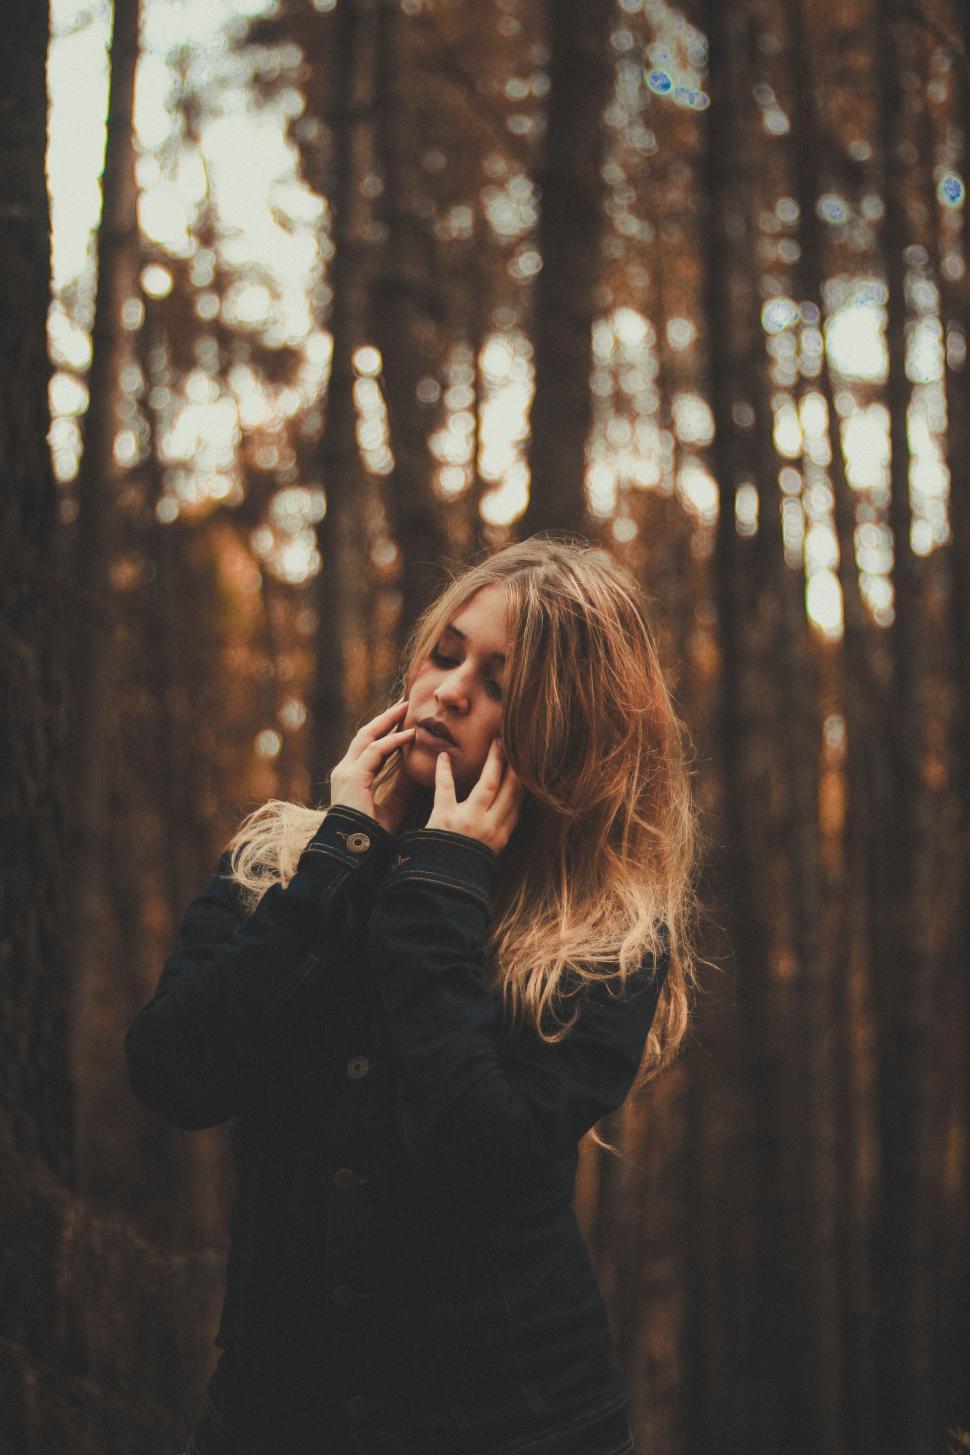 Free Image of Woman Standing in Forest Talking on Cell Phone 